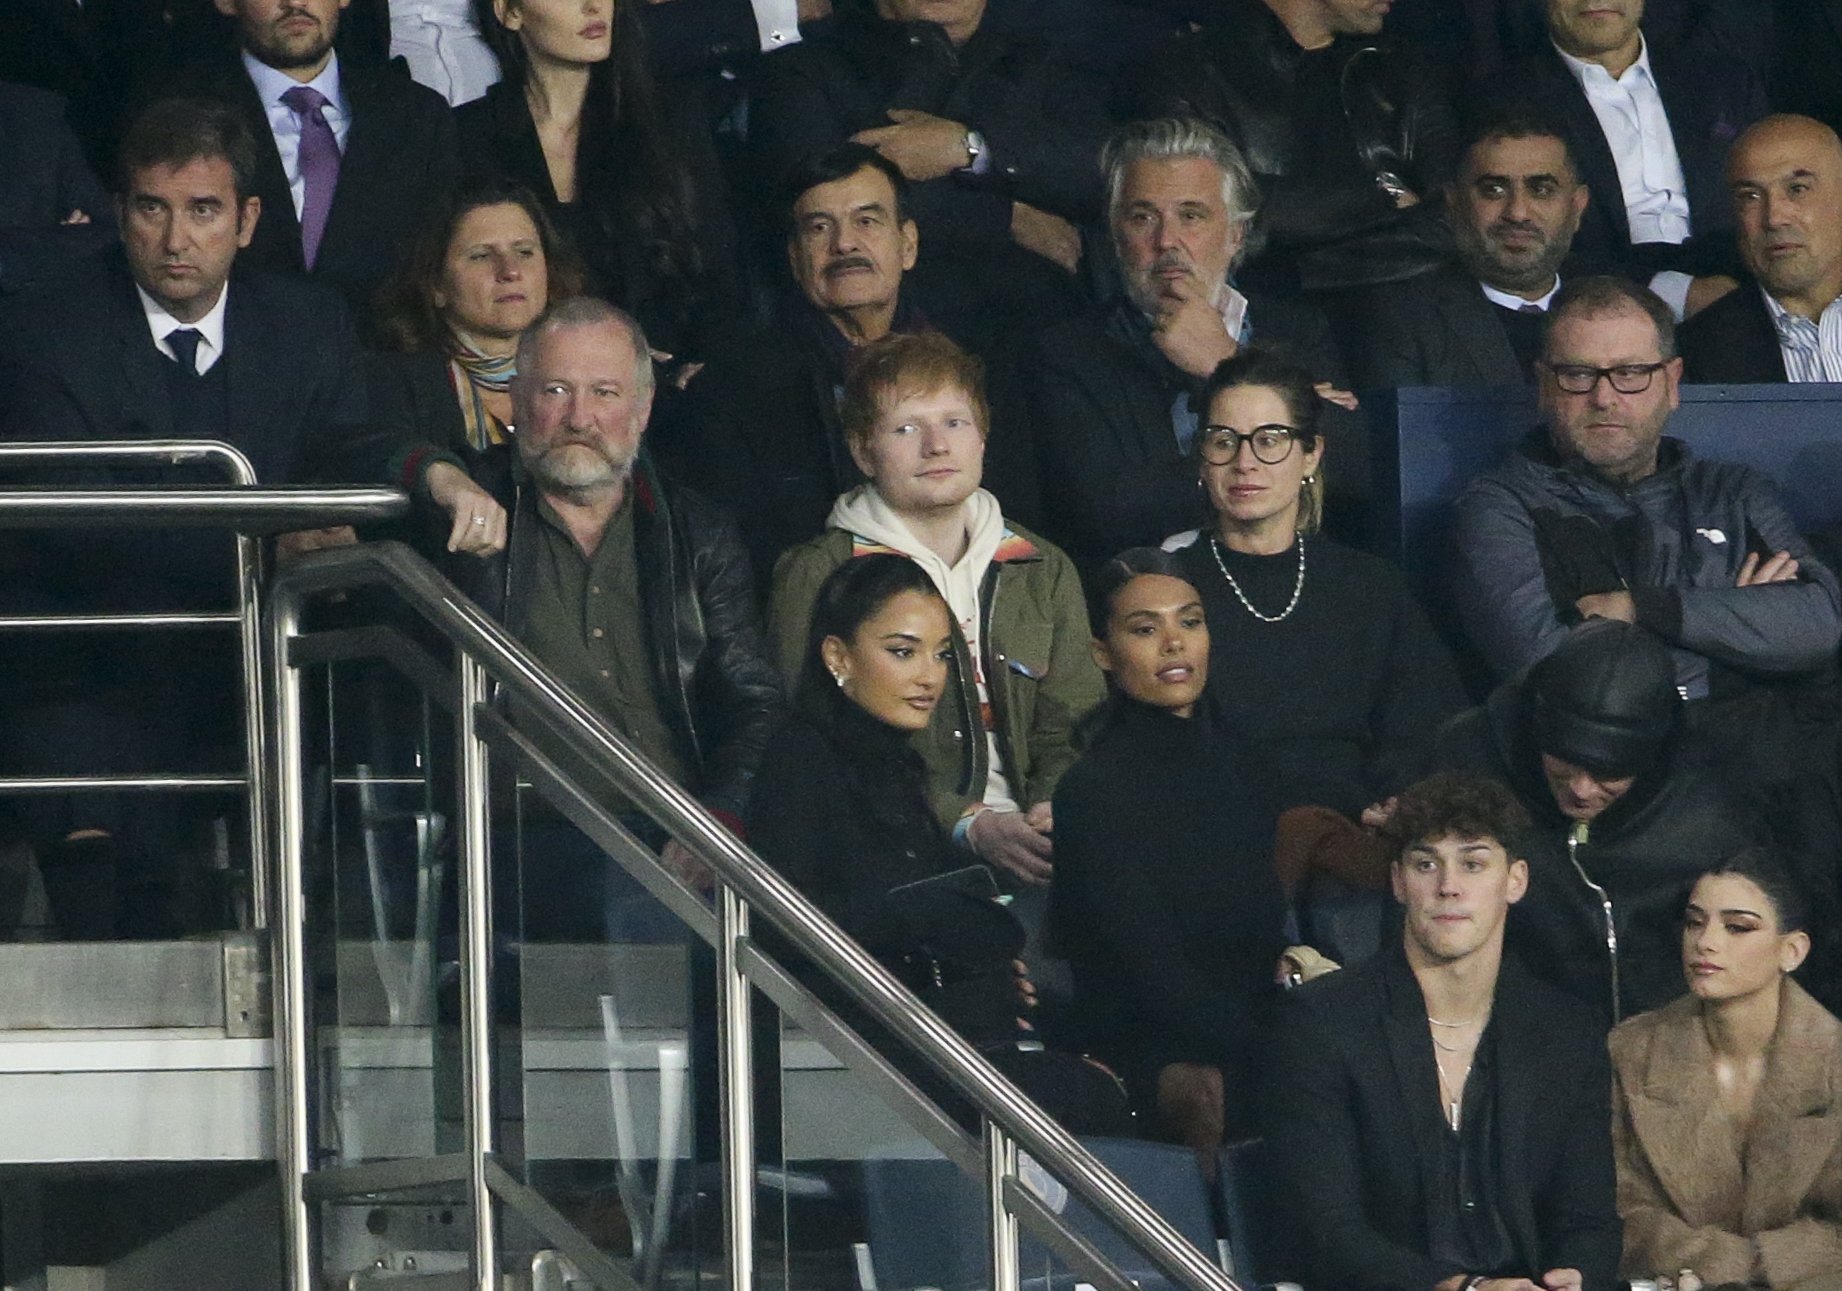  Ed Sheeran is pictured sitting between his father John Sheeran and his wife Cherry Seaborn at a match between Paris Saint-Germain (PSG) and Manchester City (Man City) at Parc des Princes stadium on September 28, 2021, in Paris, France | Source: Getty Images